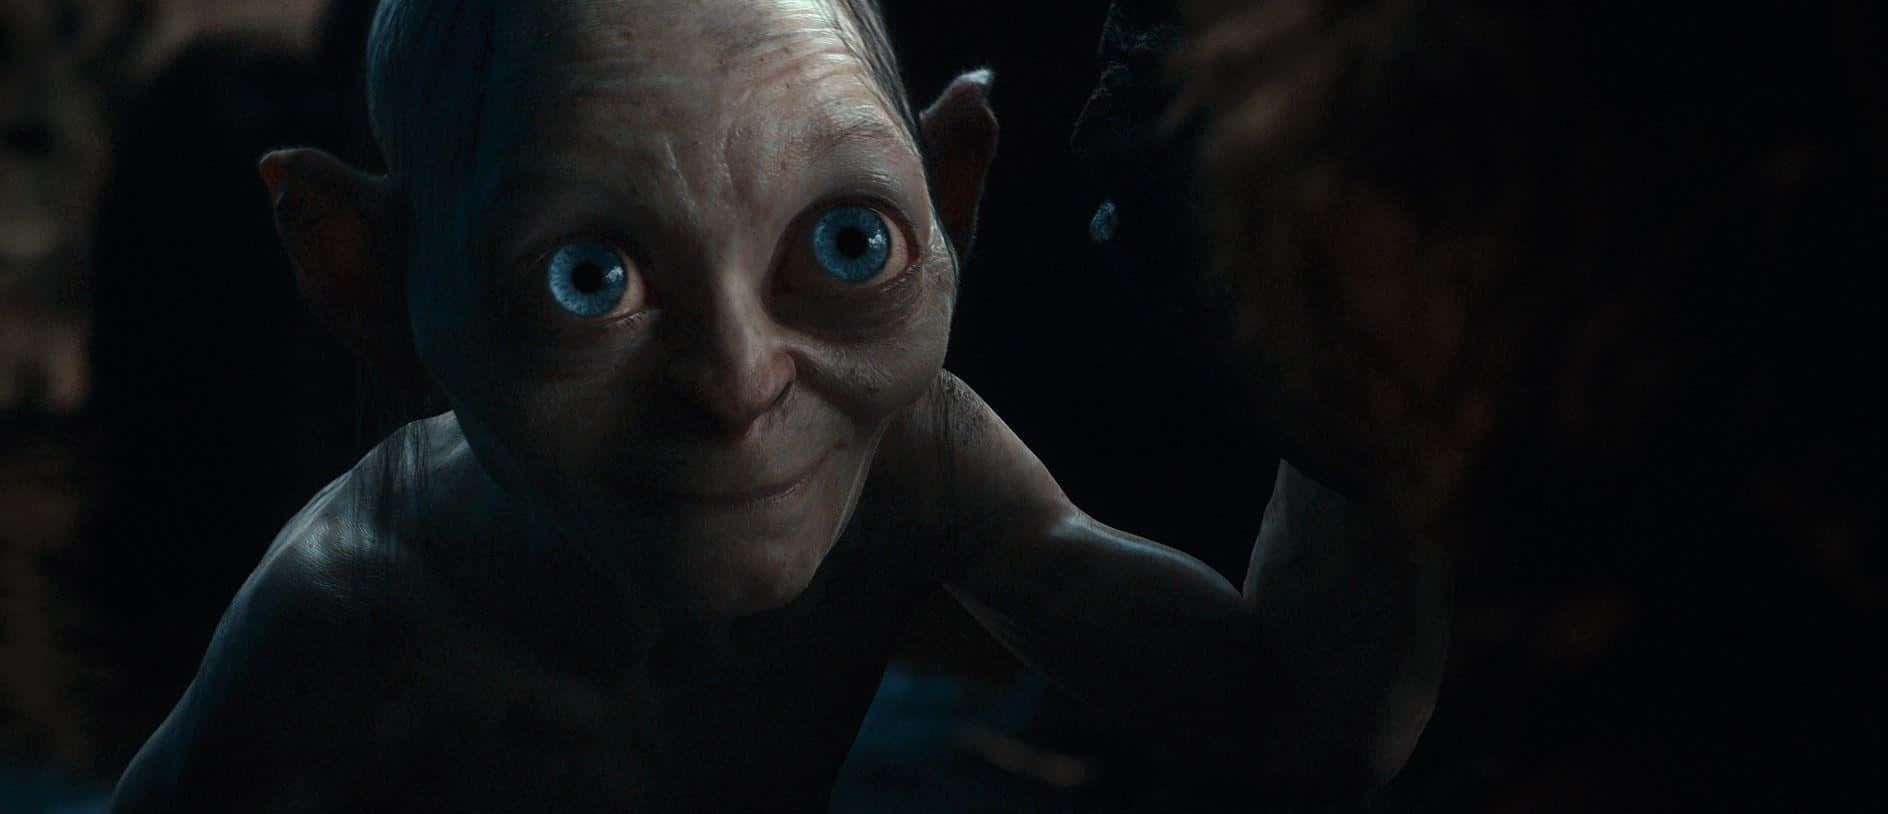 Gollum, a character created by J.R.R. Tolkien in The Lord of the Rings